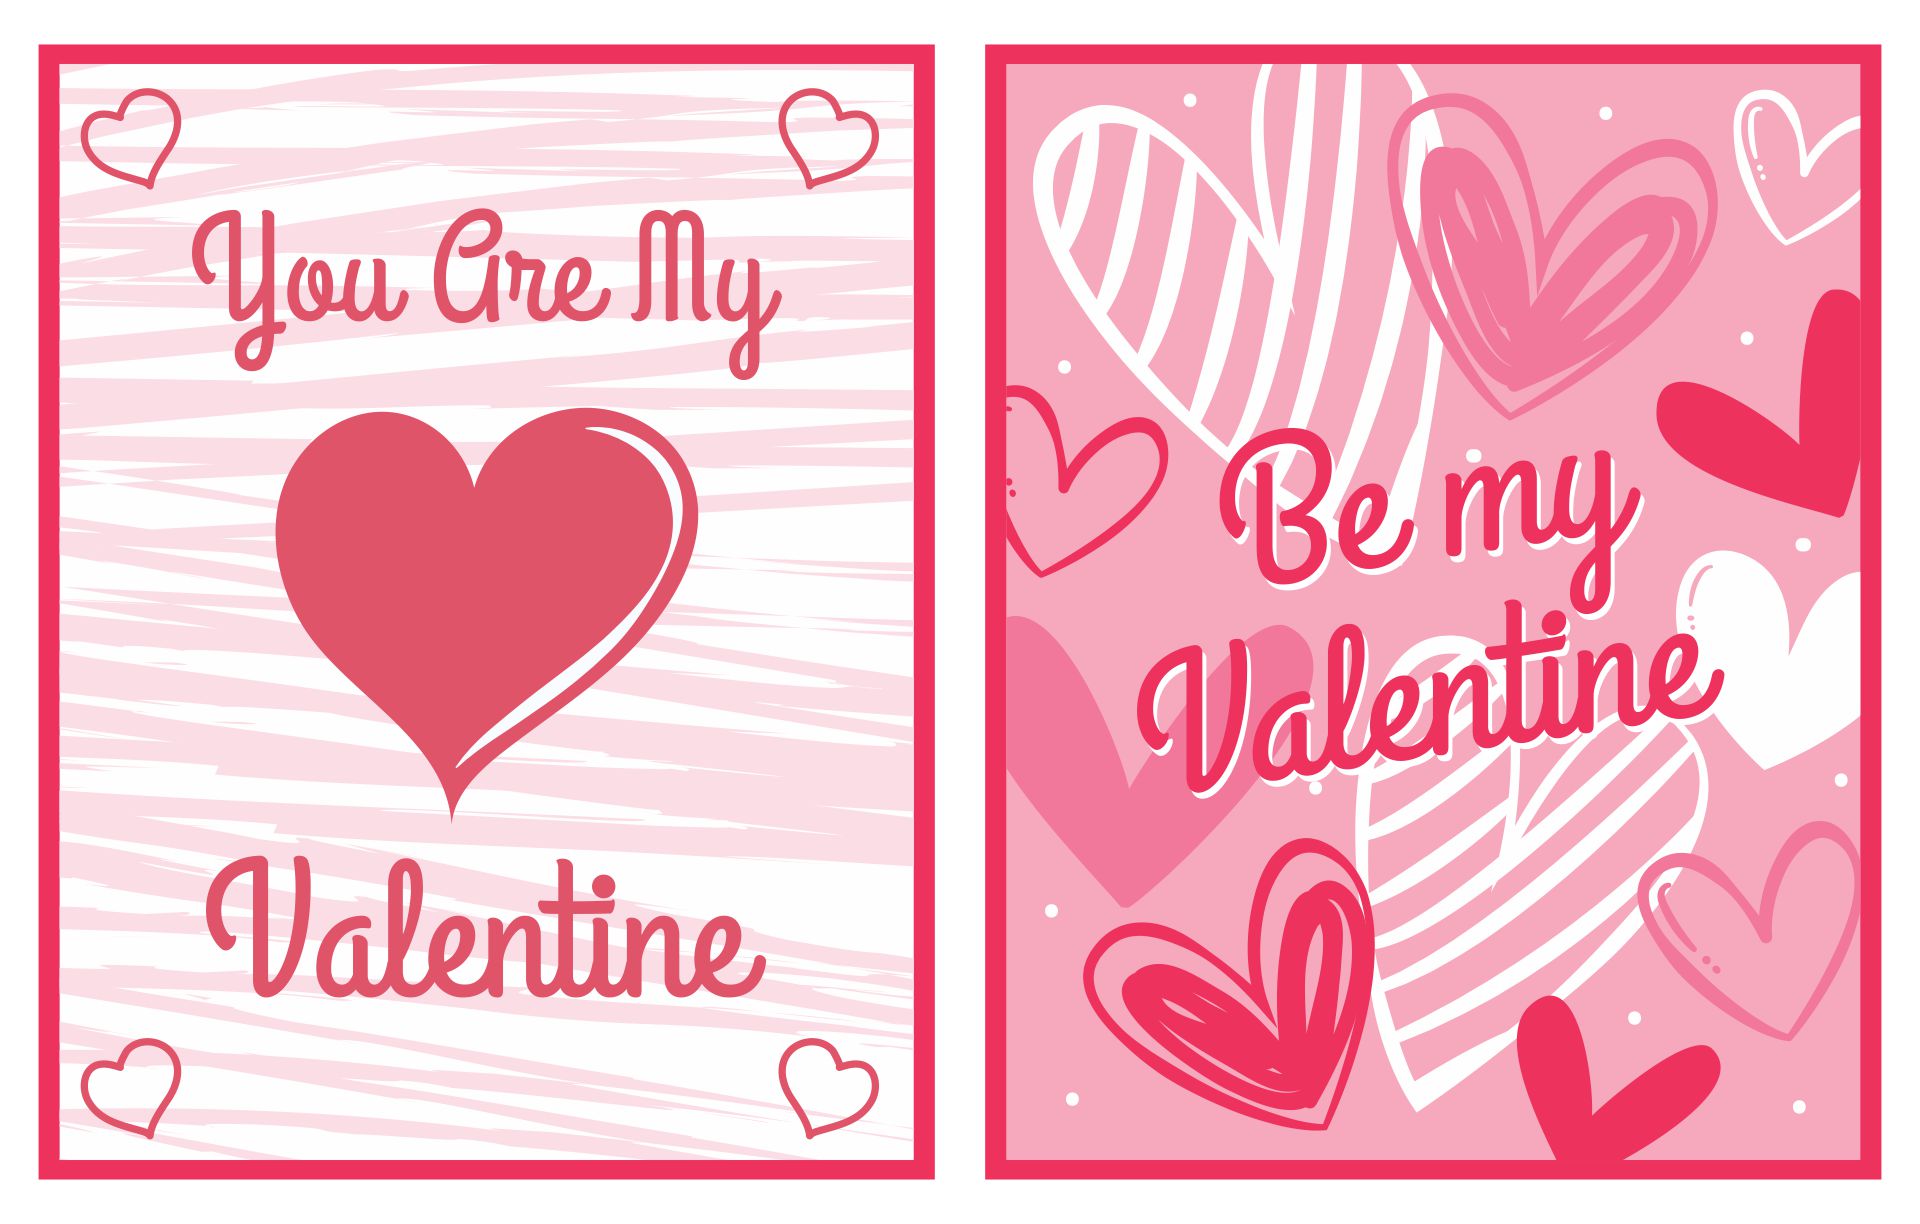 Printable Birthday Cards Printable Valentines Day Cards February 2020 